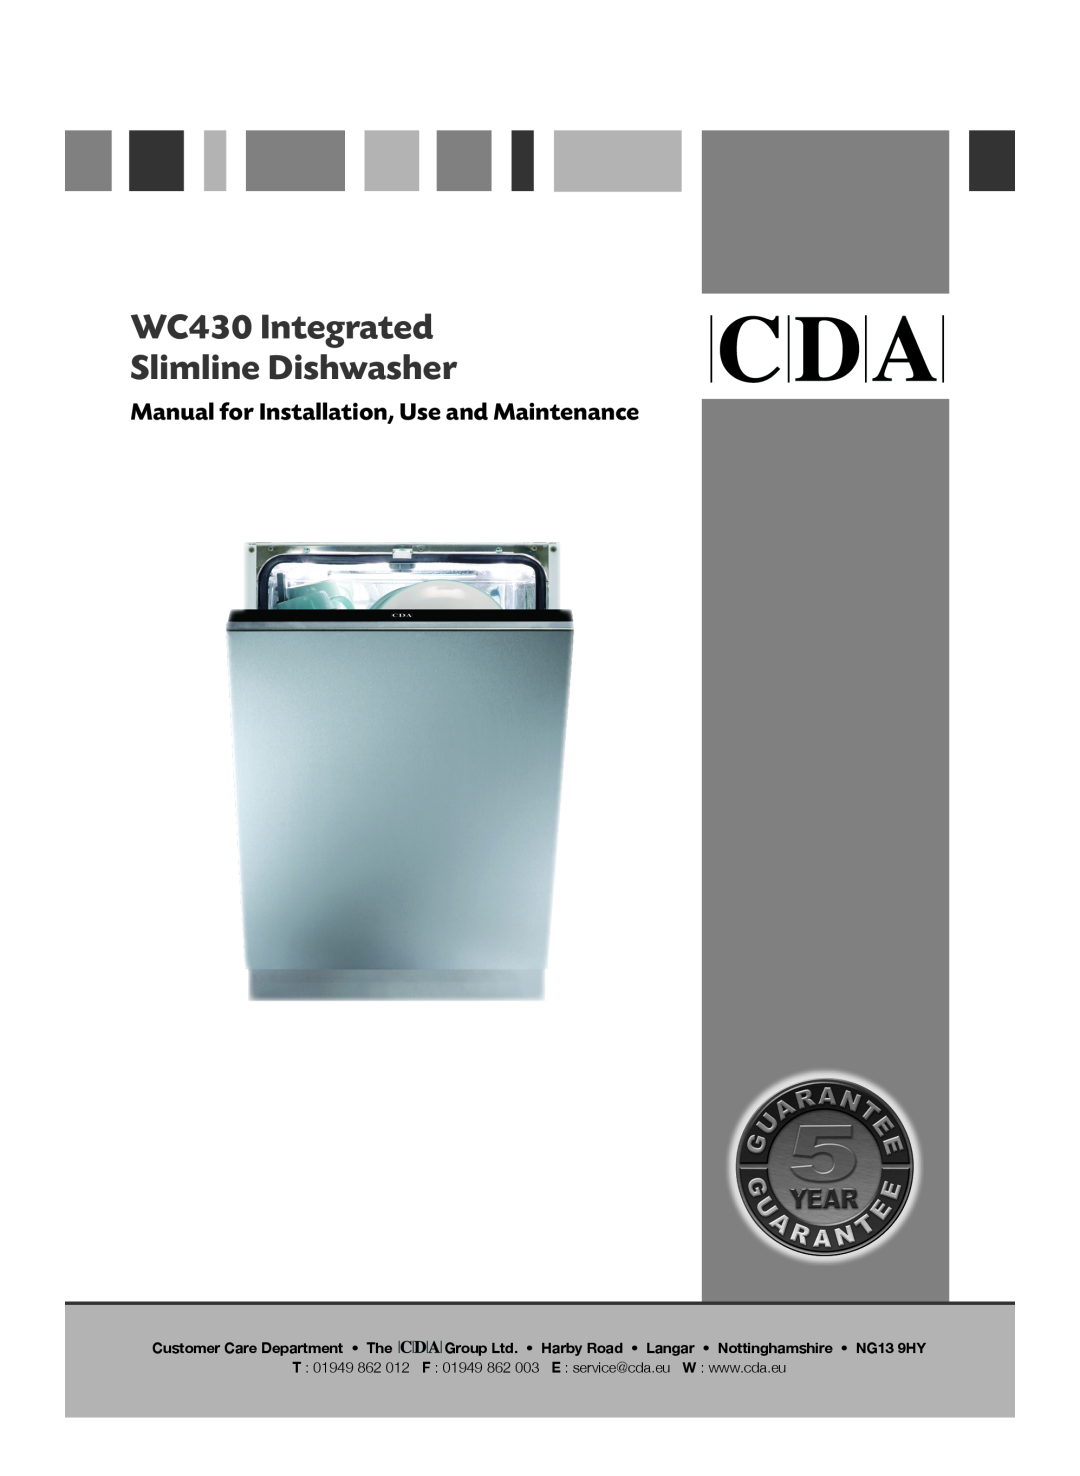 CDA manual WC430 Integrated Slimline Dishwasher, Manual for Installation, Use and Maintenance 